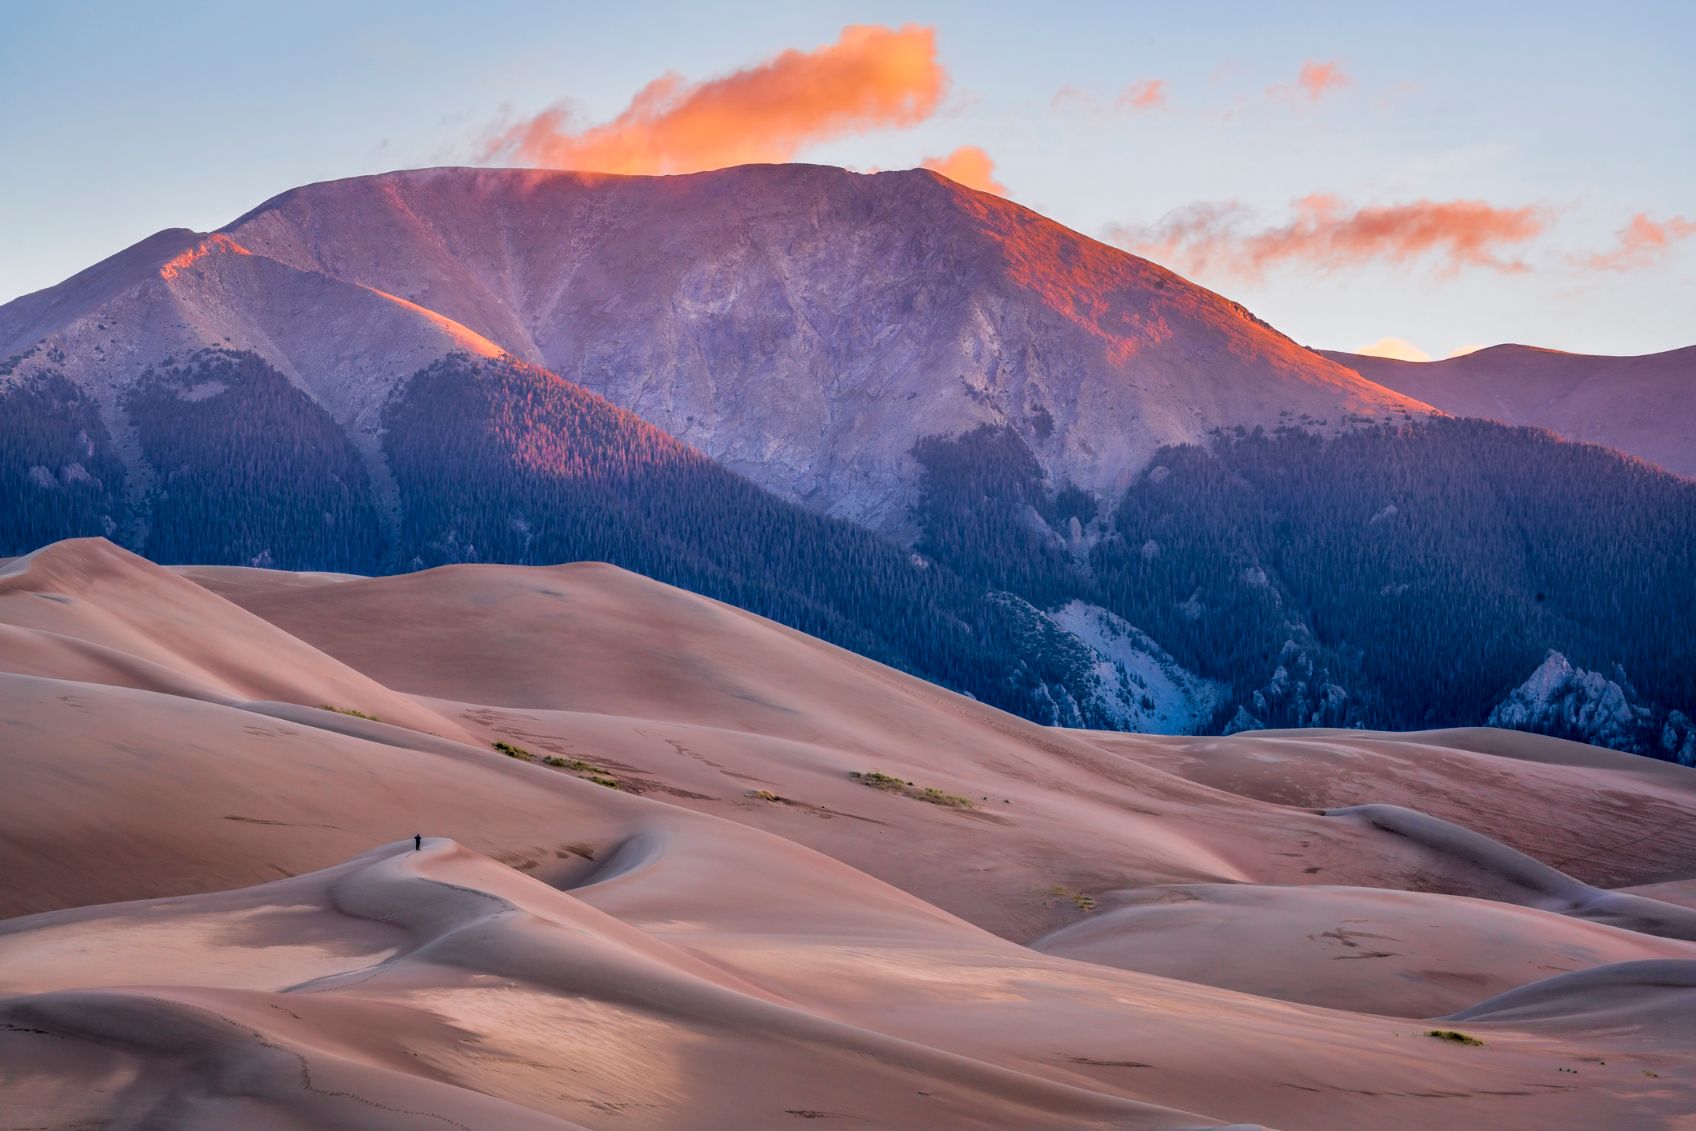 The Great Sand Dunes National Park in Colorado